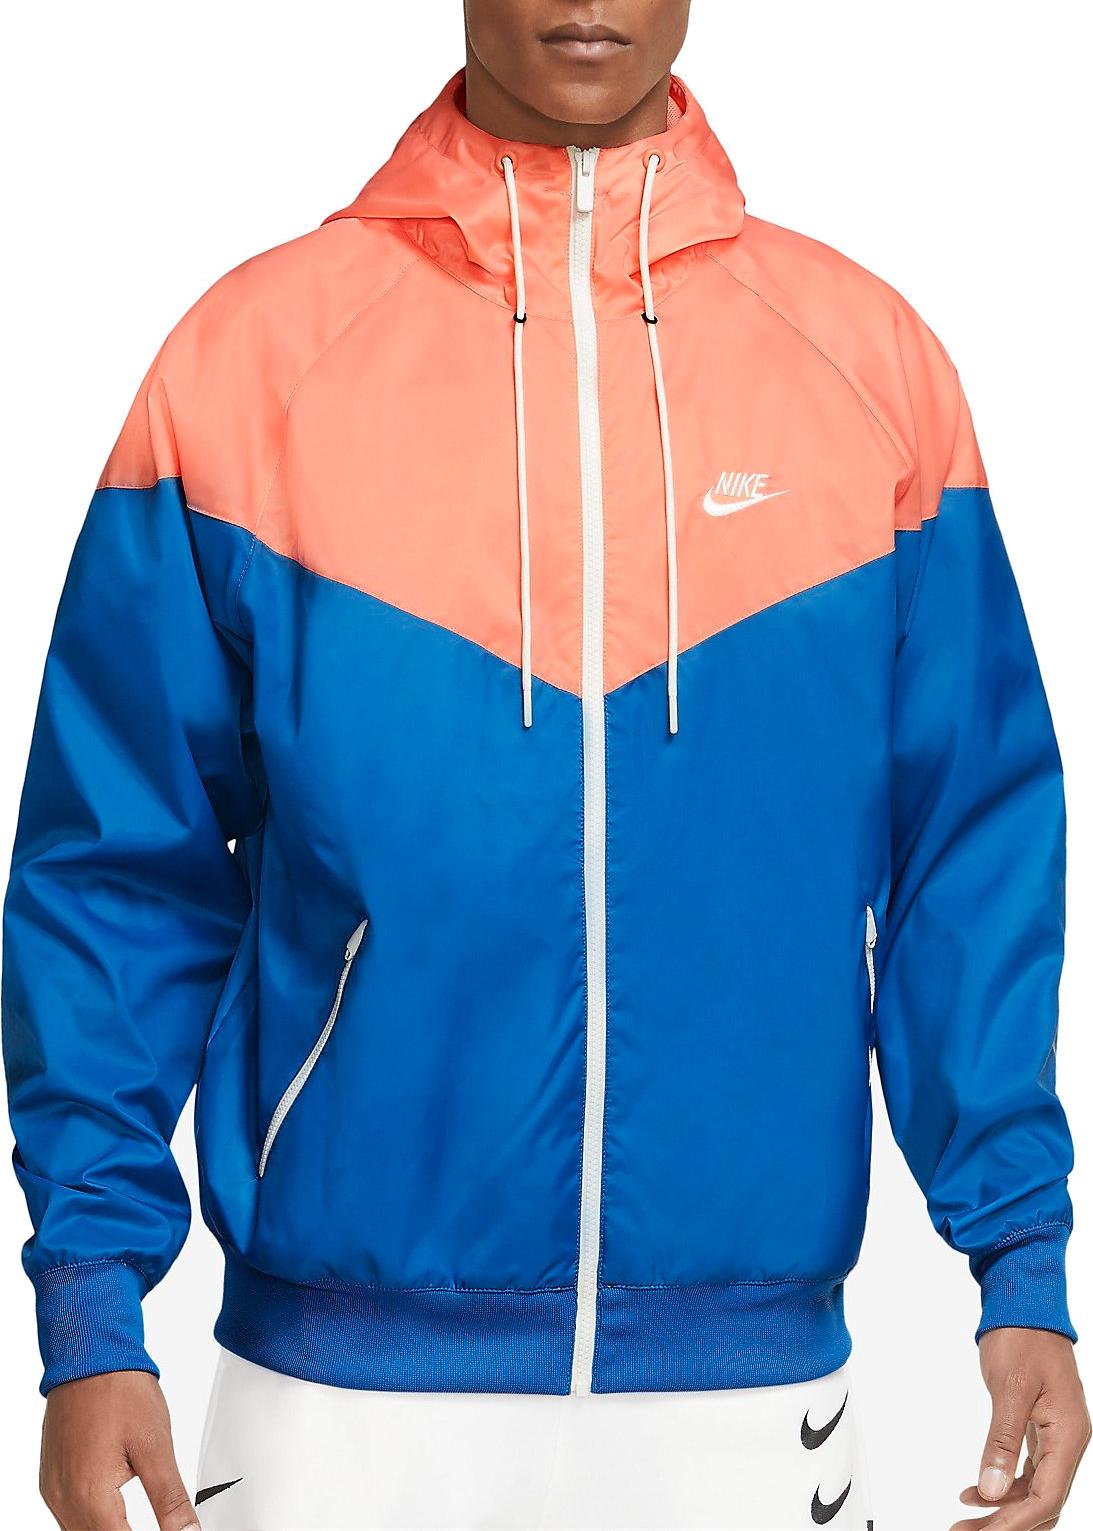 colina Torpe combustible Chaqueta con capucha Nike Sportswear Windrunner Men s Hooded Jacket -  Top4Fitness.es